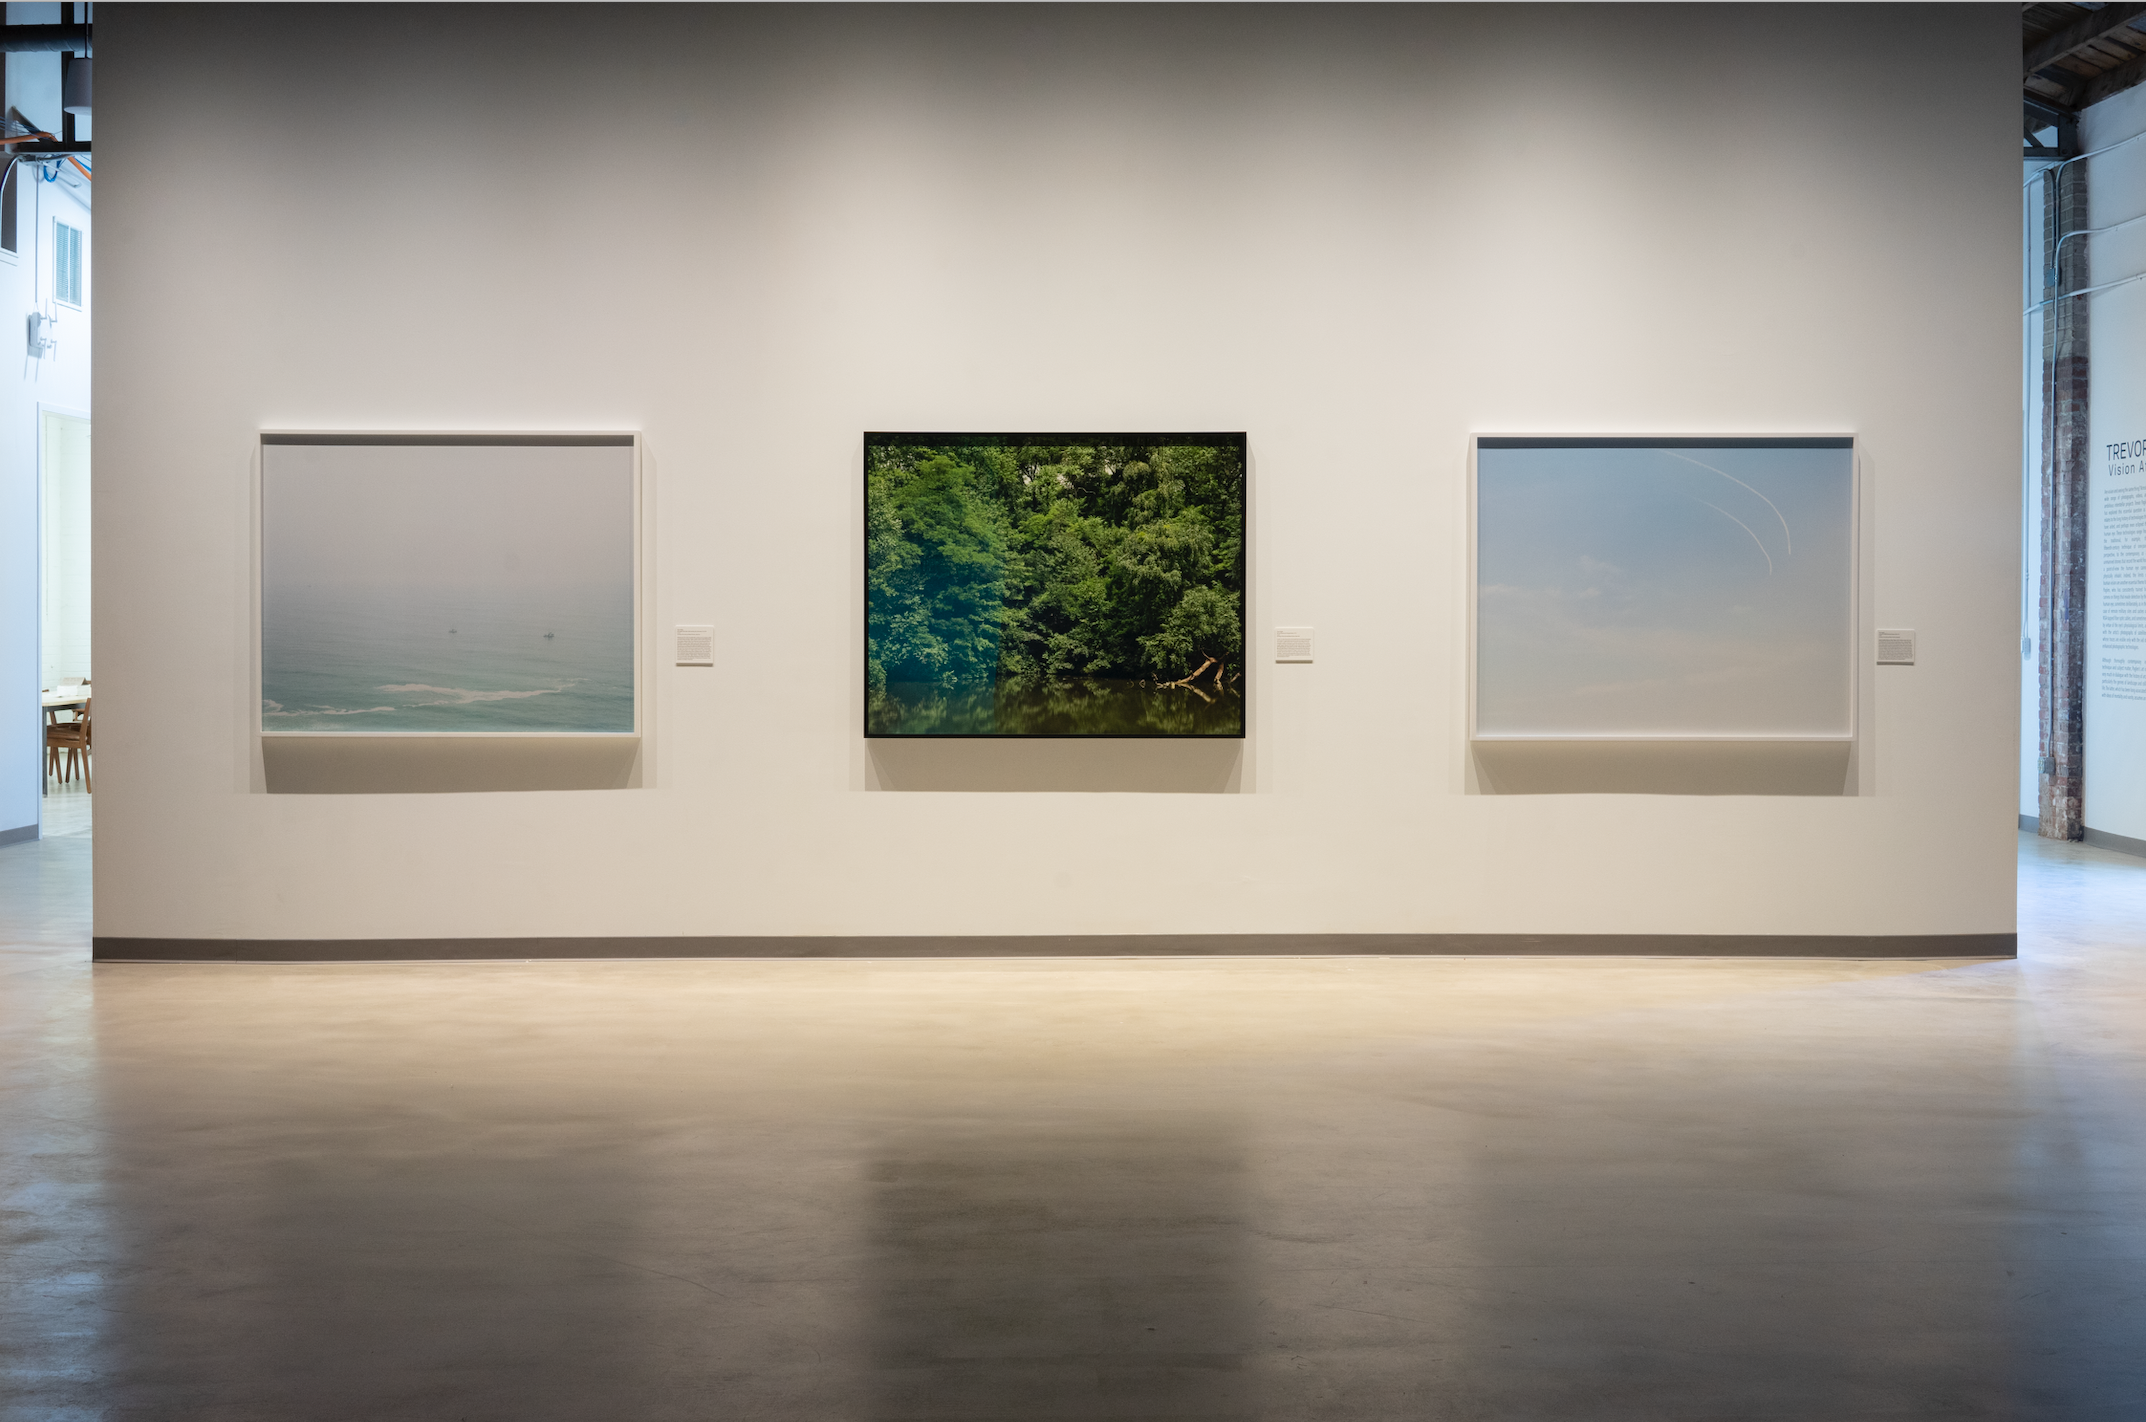 This is an installation view of three photos from artist Trevor Paglen's exhibition 